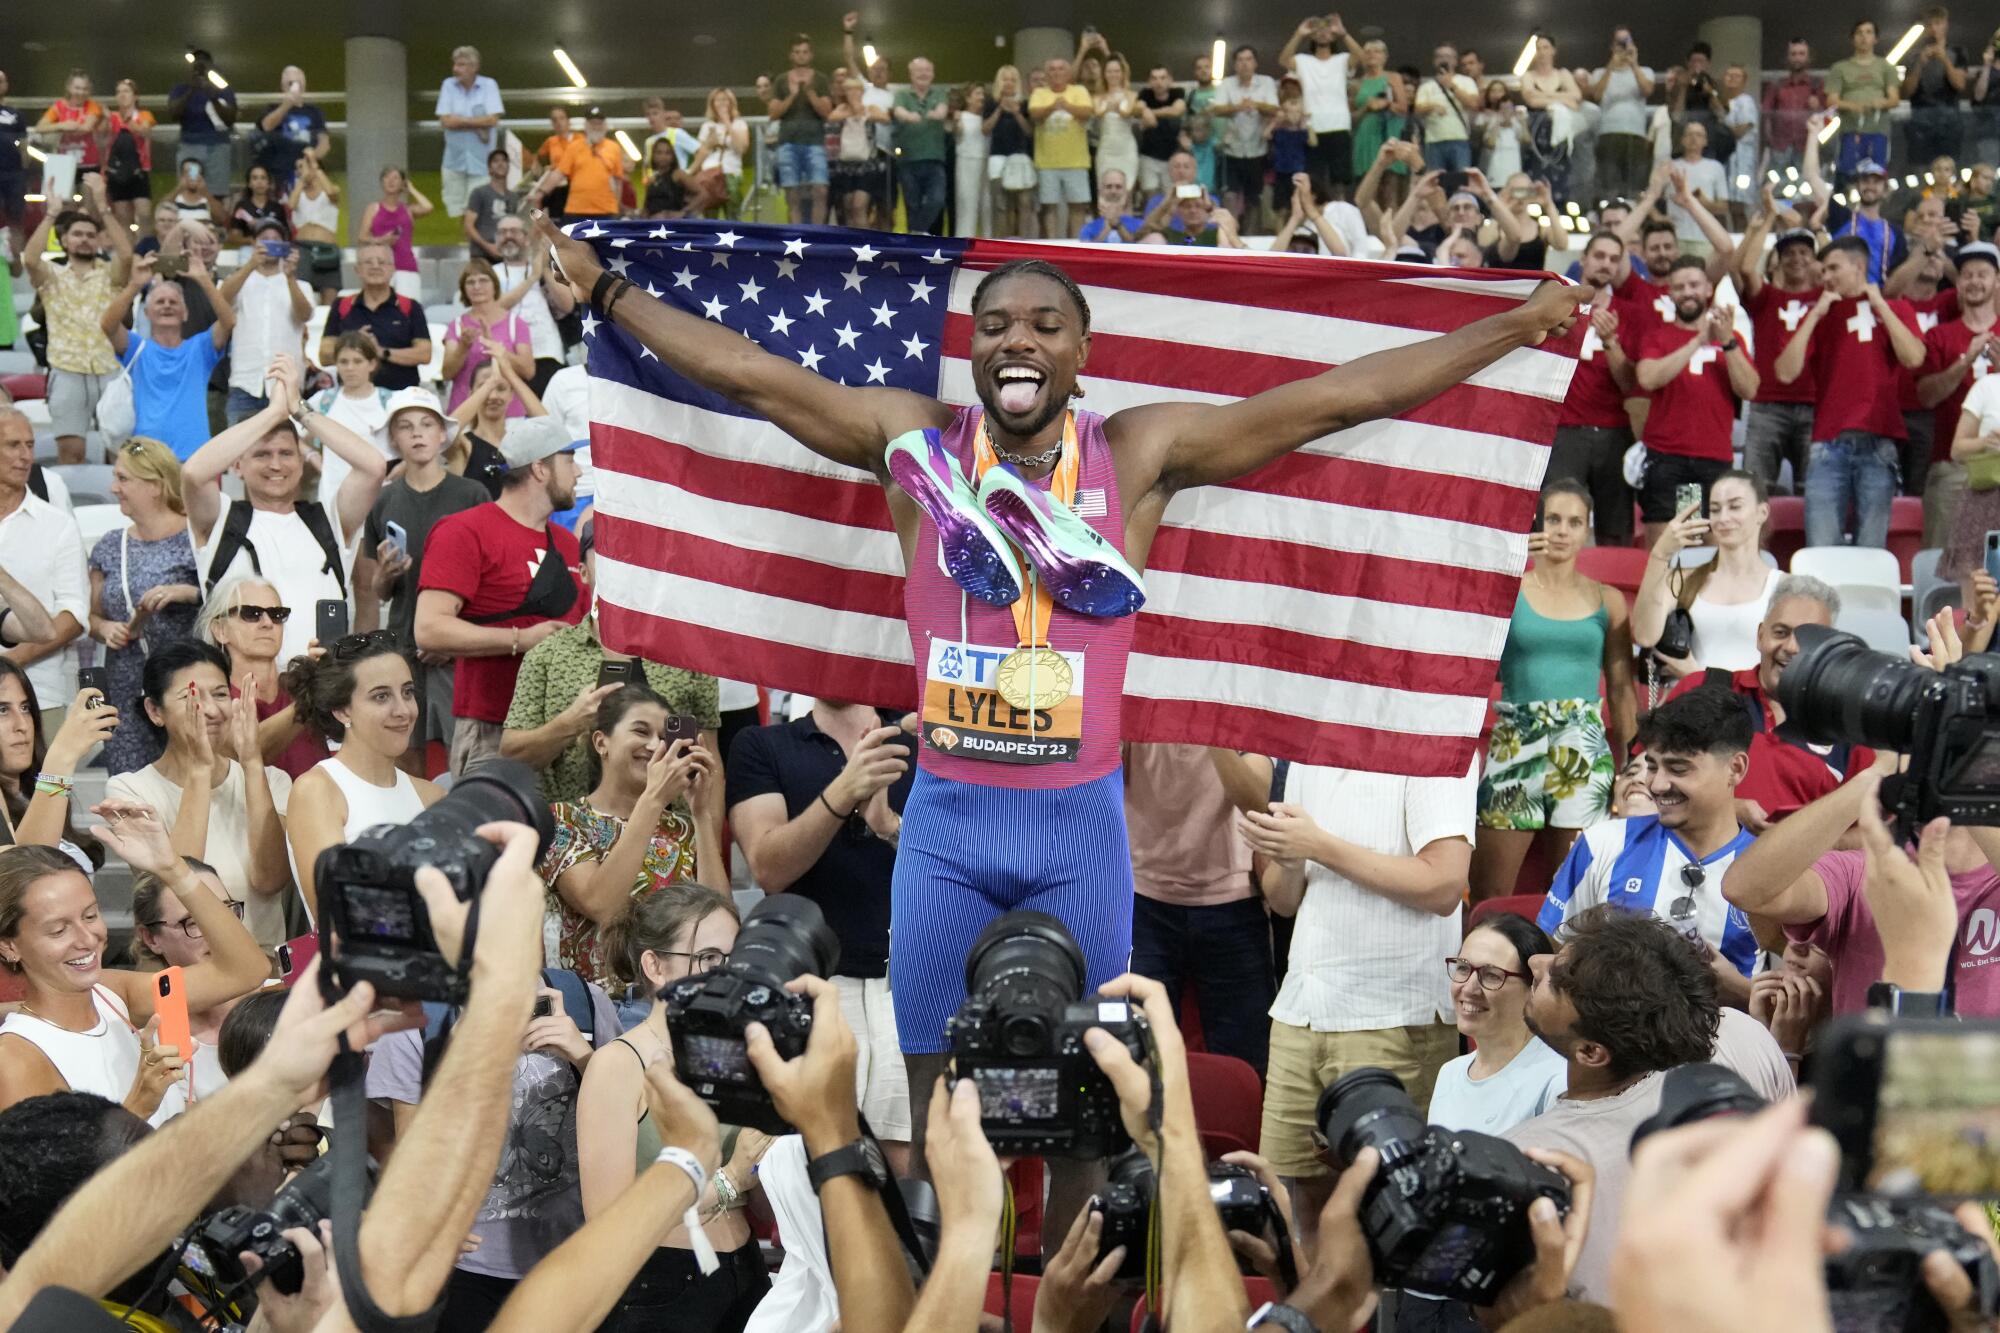 Noah Lyles celebrates after winning gold in the men's 200 meters at the World Athletics Championships.